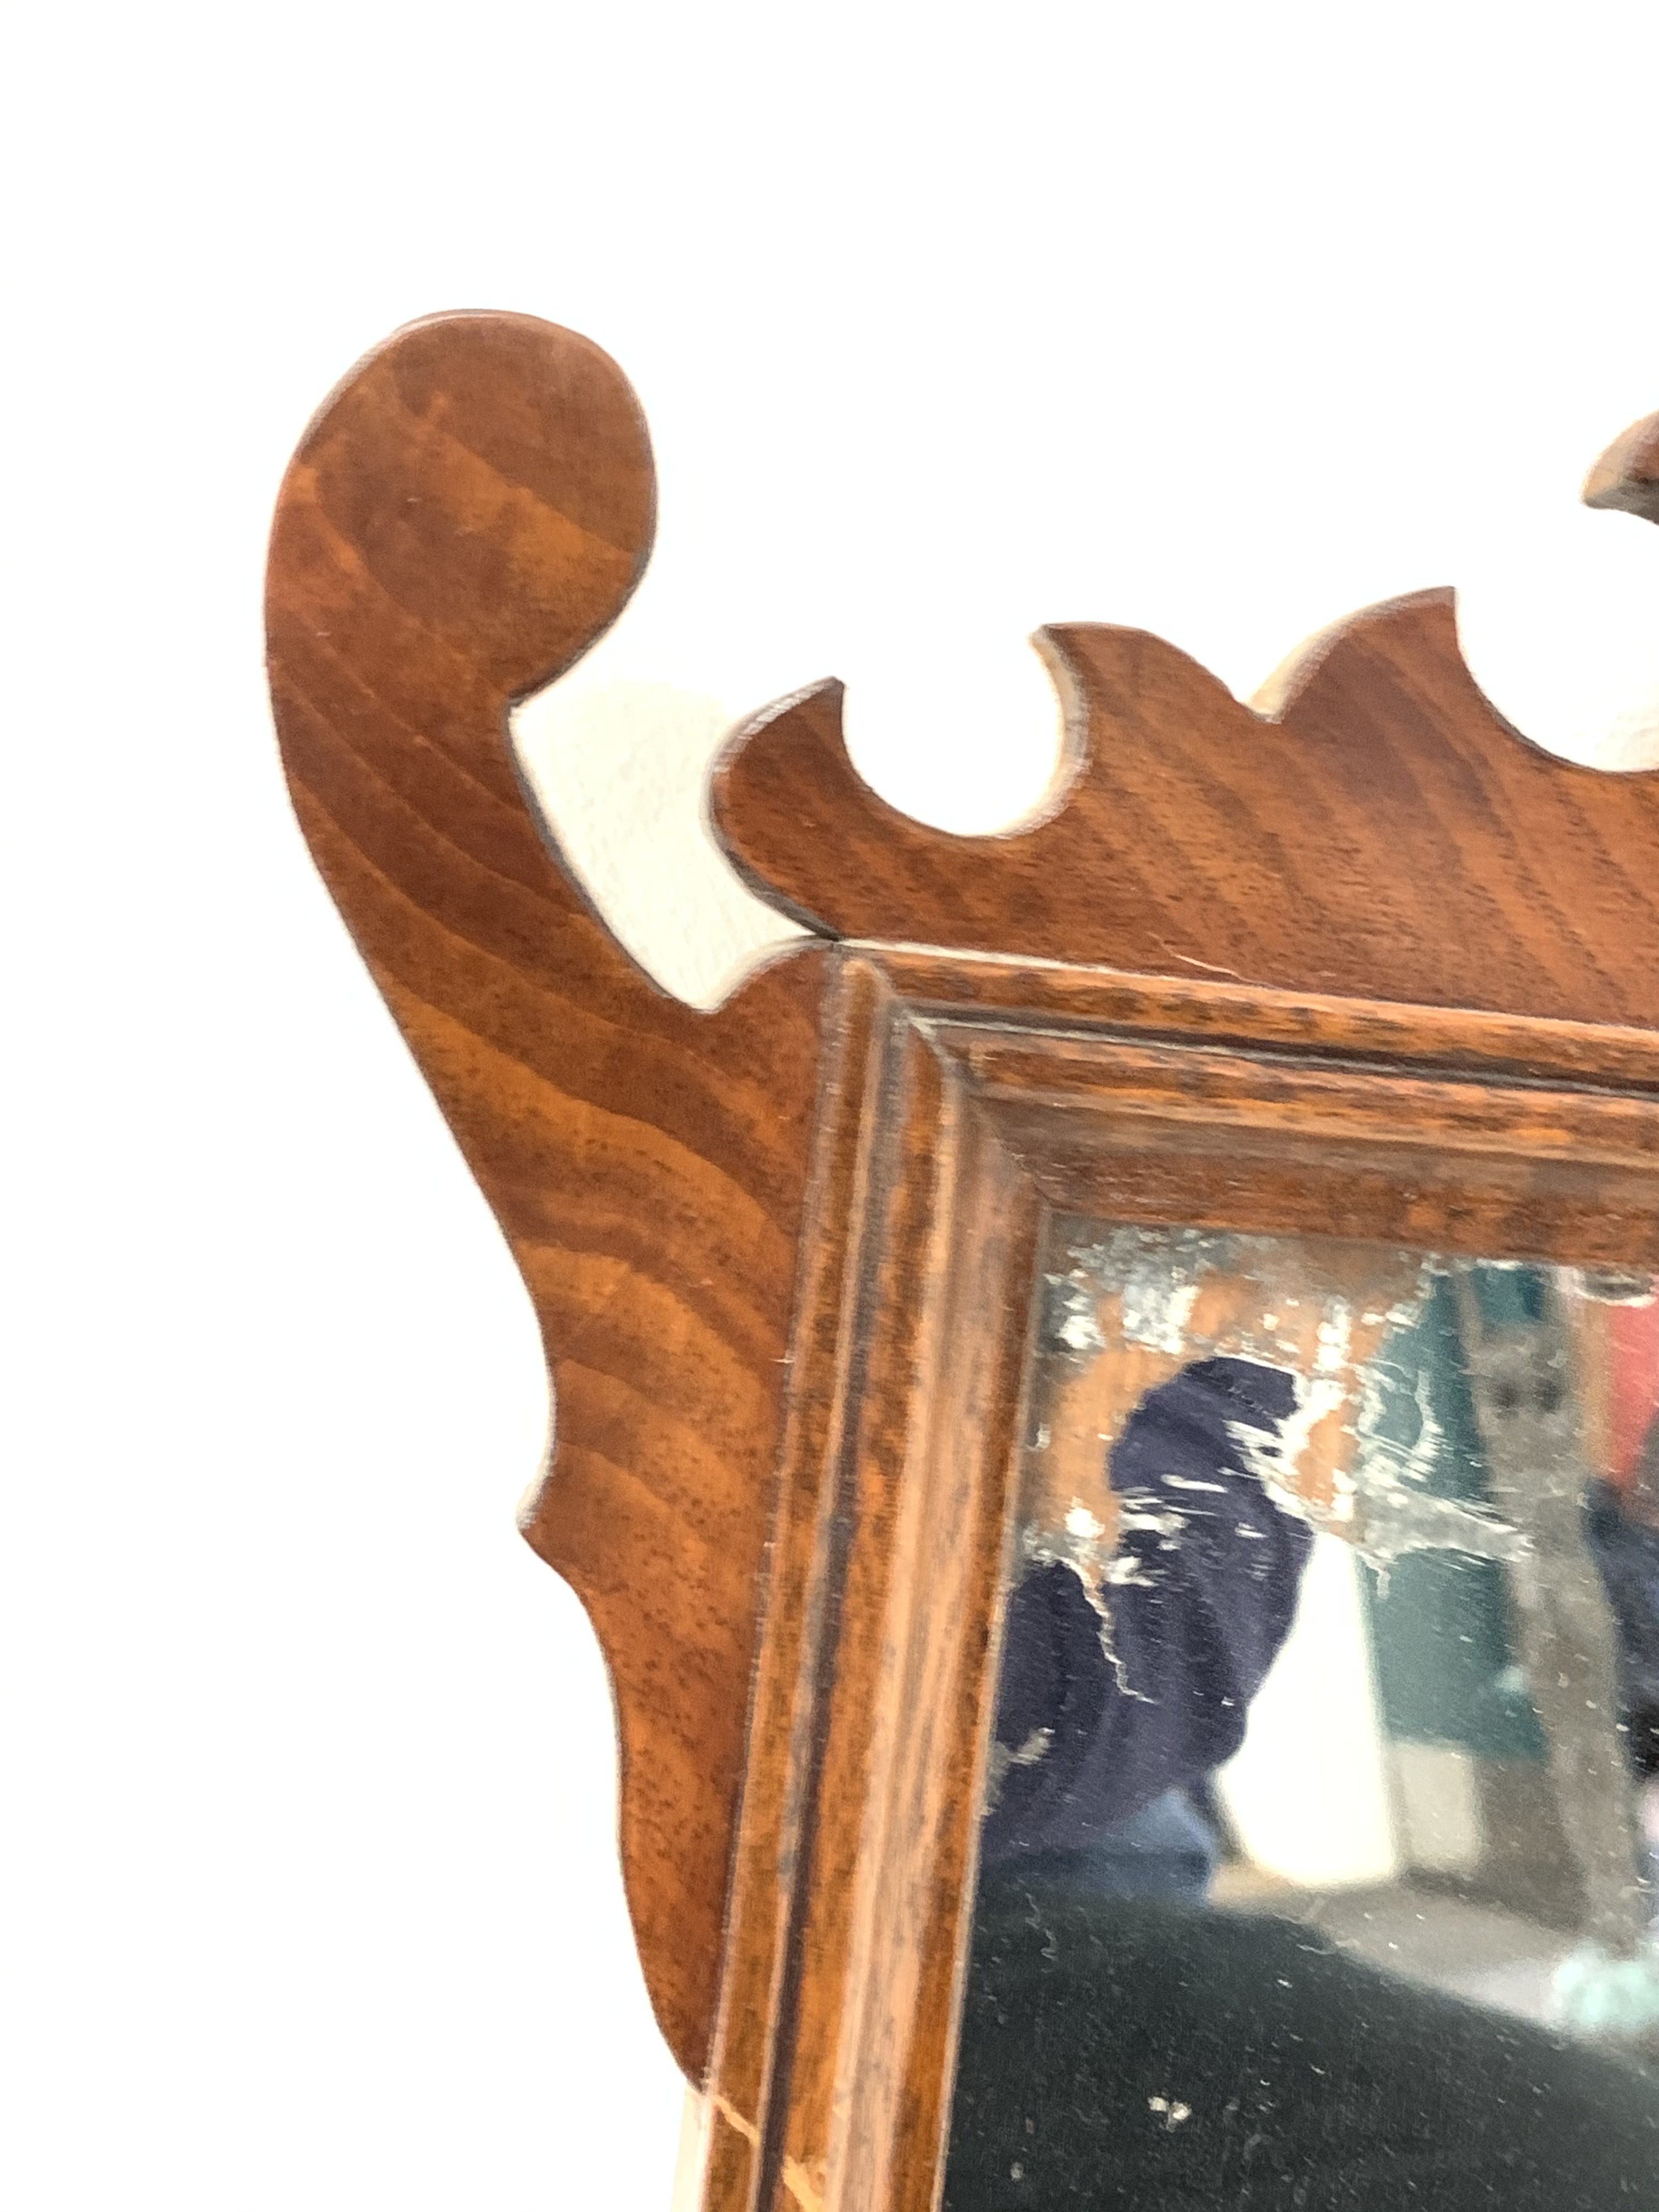 Edwardian burr walnut framed wall hanging mirror with decorative pediment and apron, (66cm x 38cm) t - Image 3 of 3